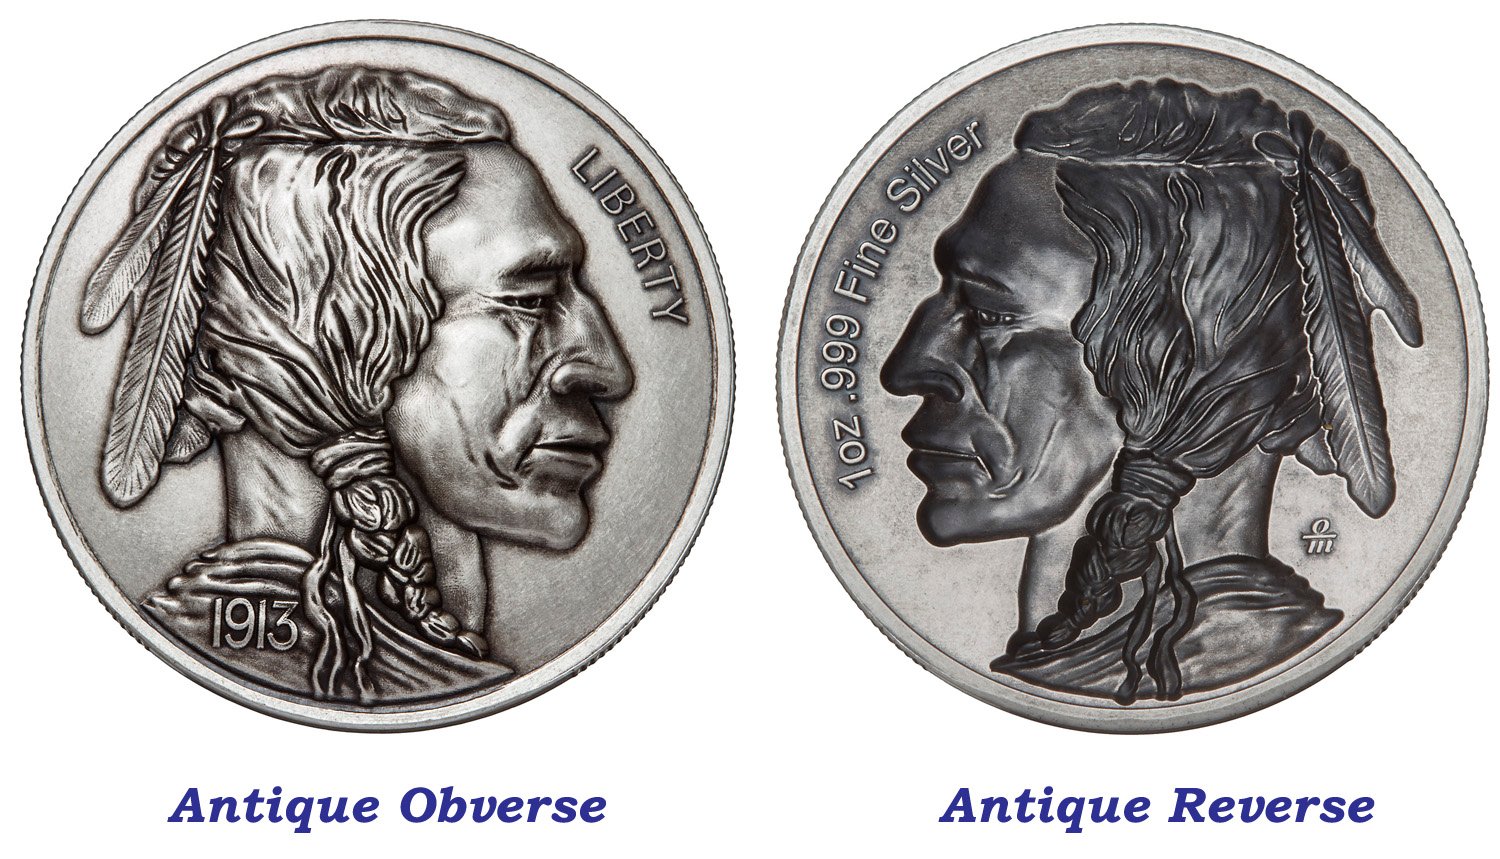 Antique 1913 Buffalo Nickel obverse and reverse